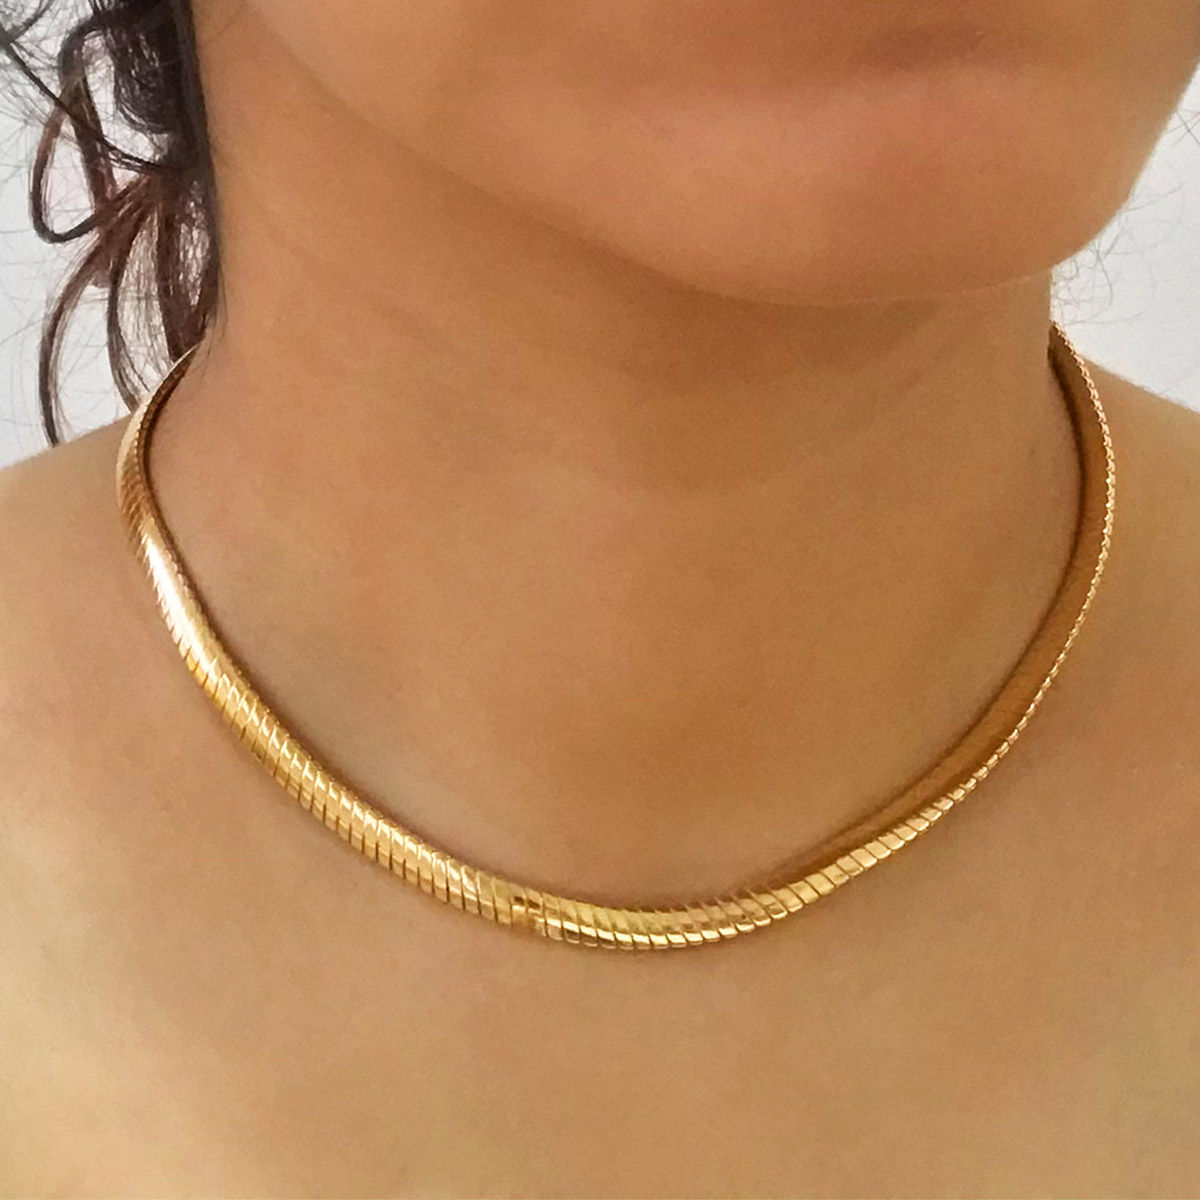 Pipa Bella Gold-Plated Snake

Chain